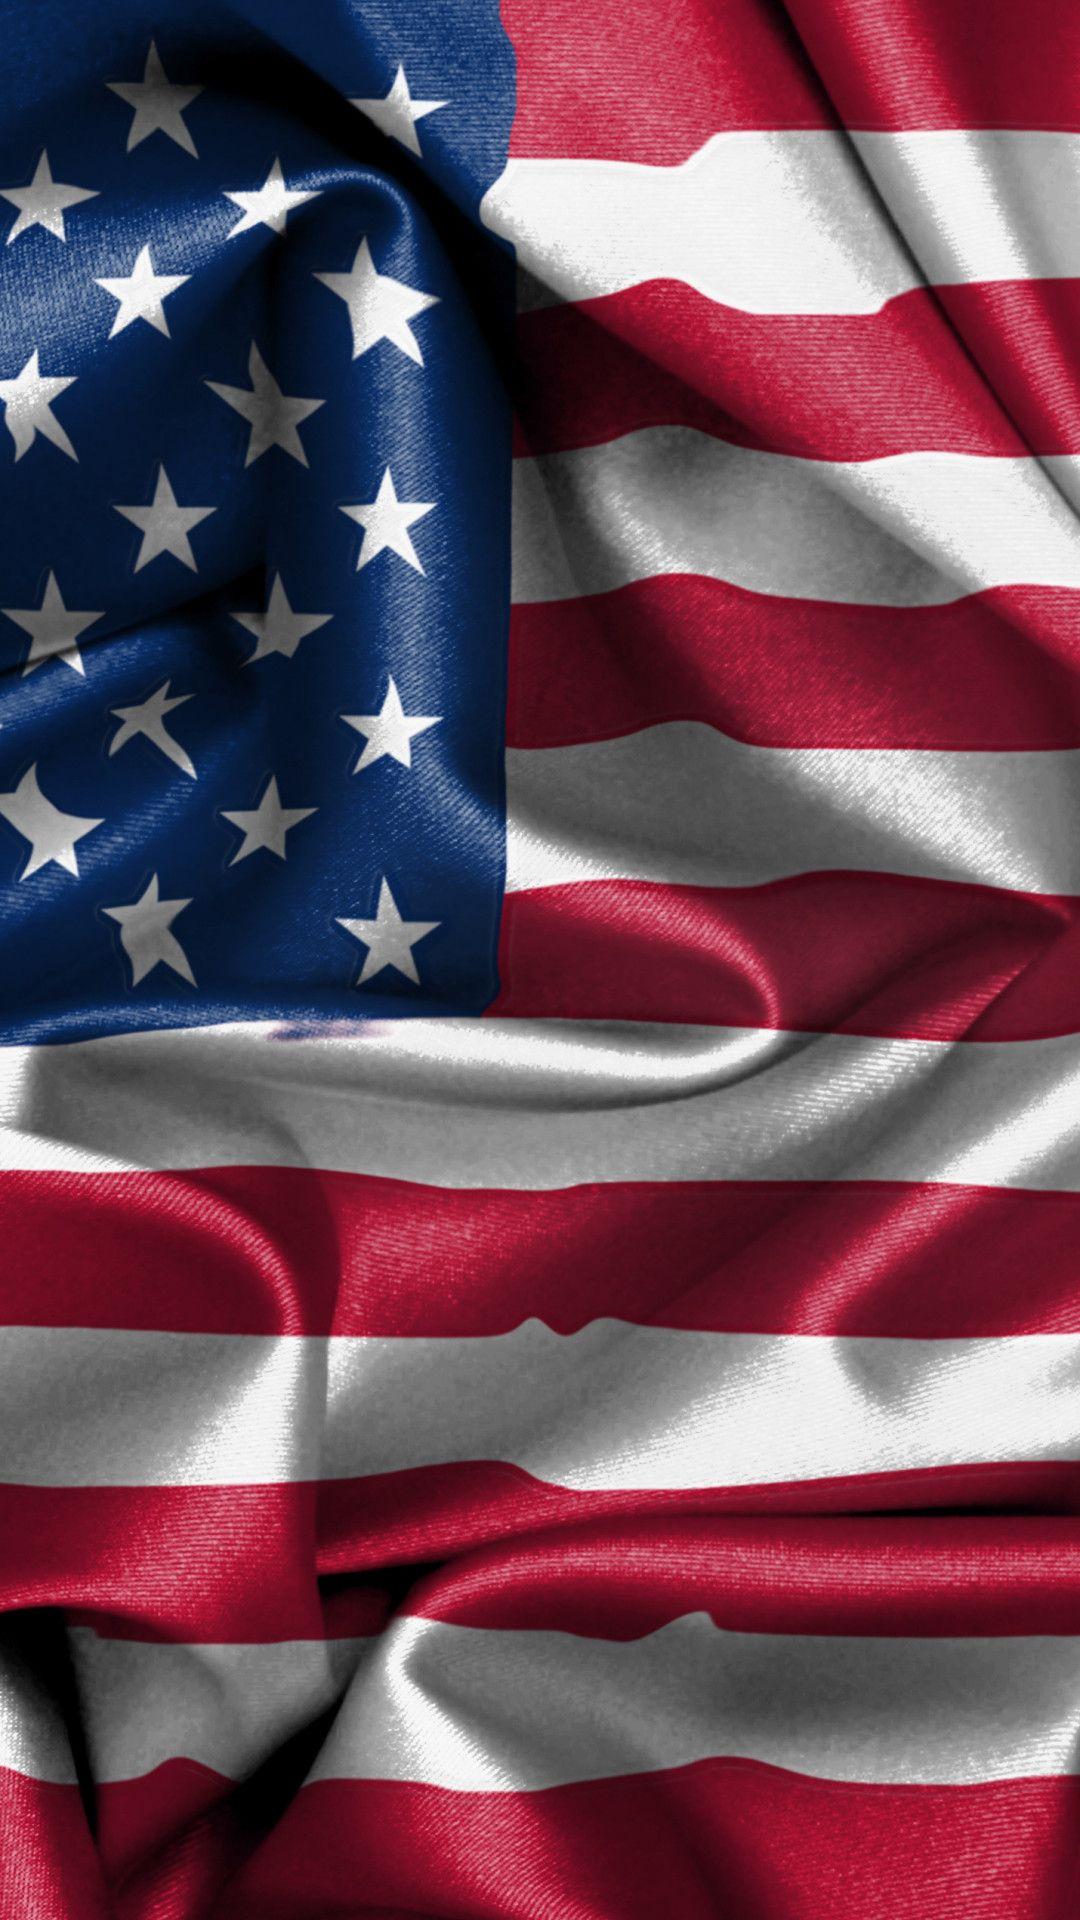 United States Iphone Wallpapers Top Free United States Iphone Backgrounds Wallpaperaccess